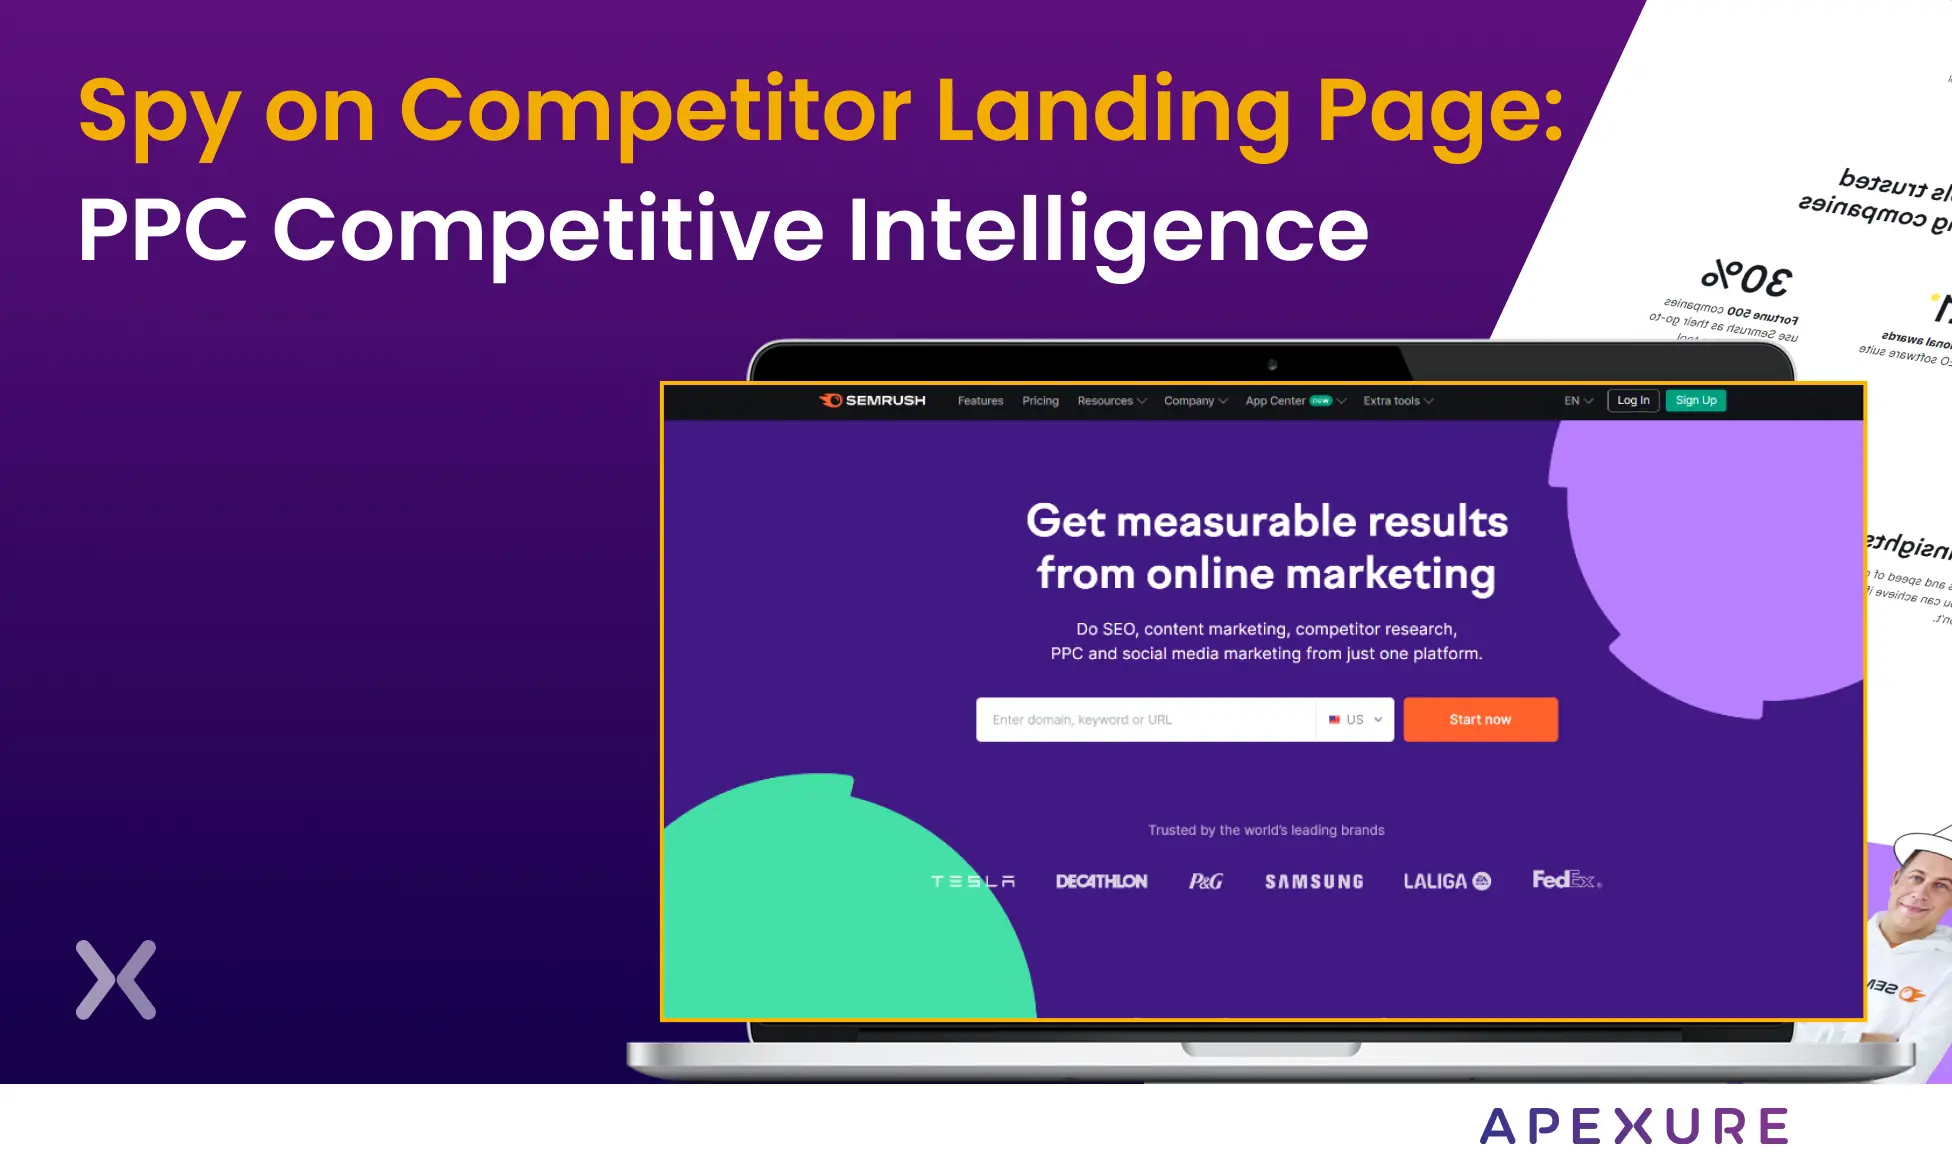 py-on-competitor-landing-pages-with-ppc-competitive-intelligence